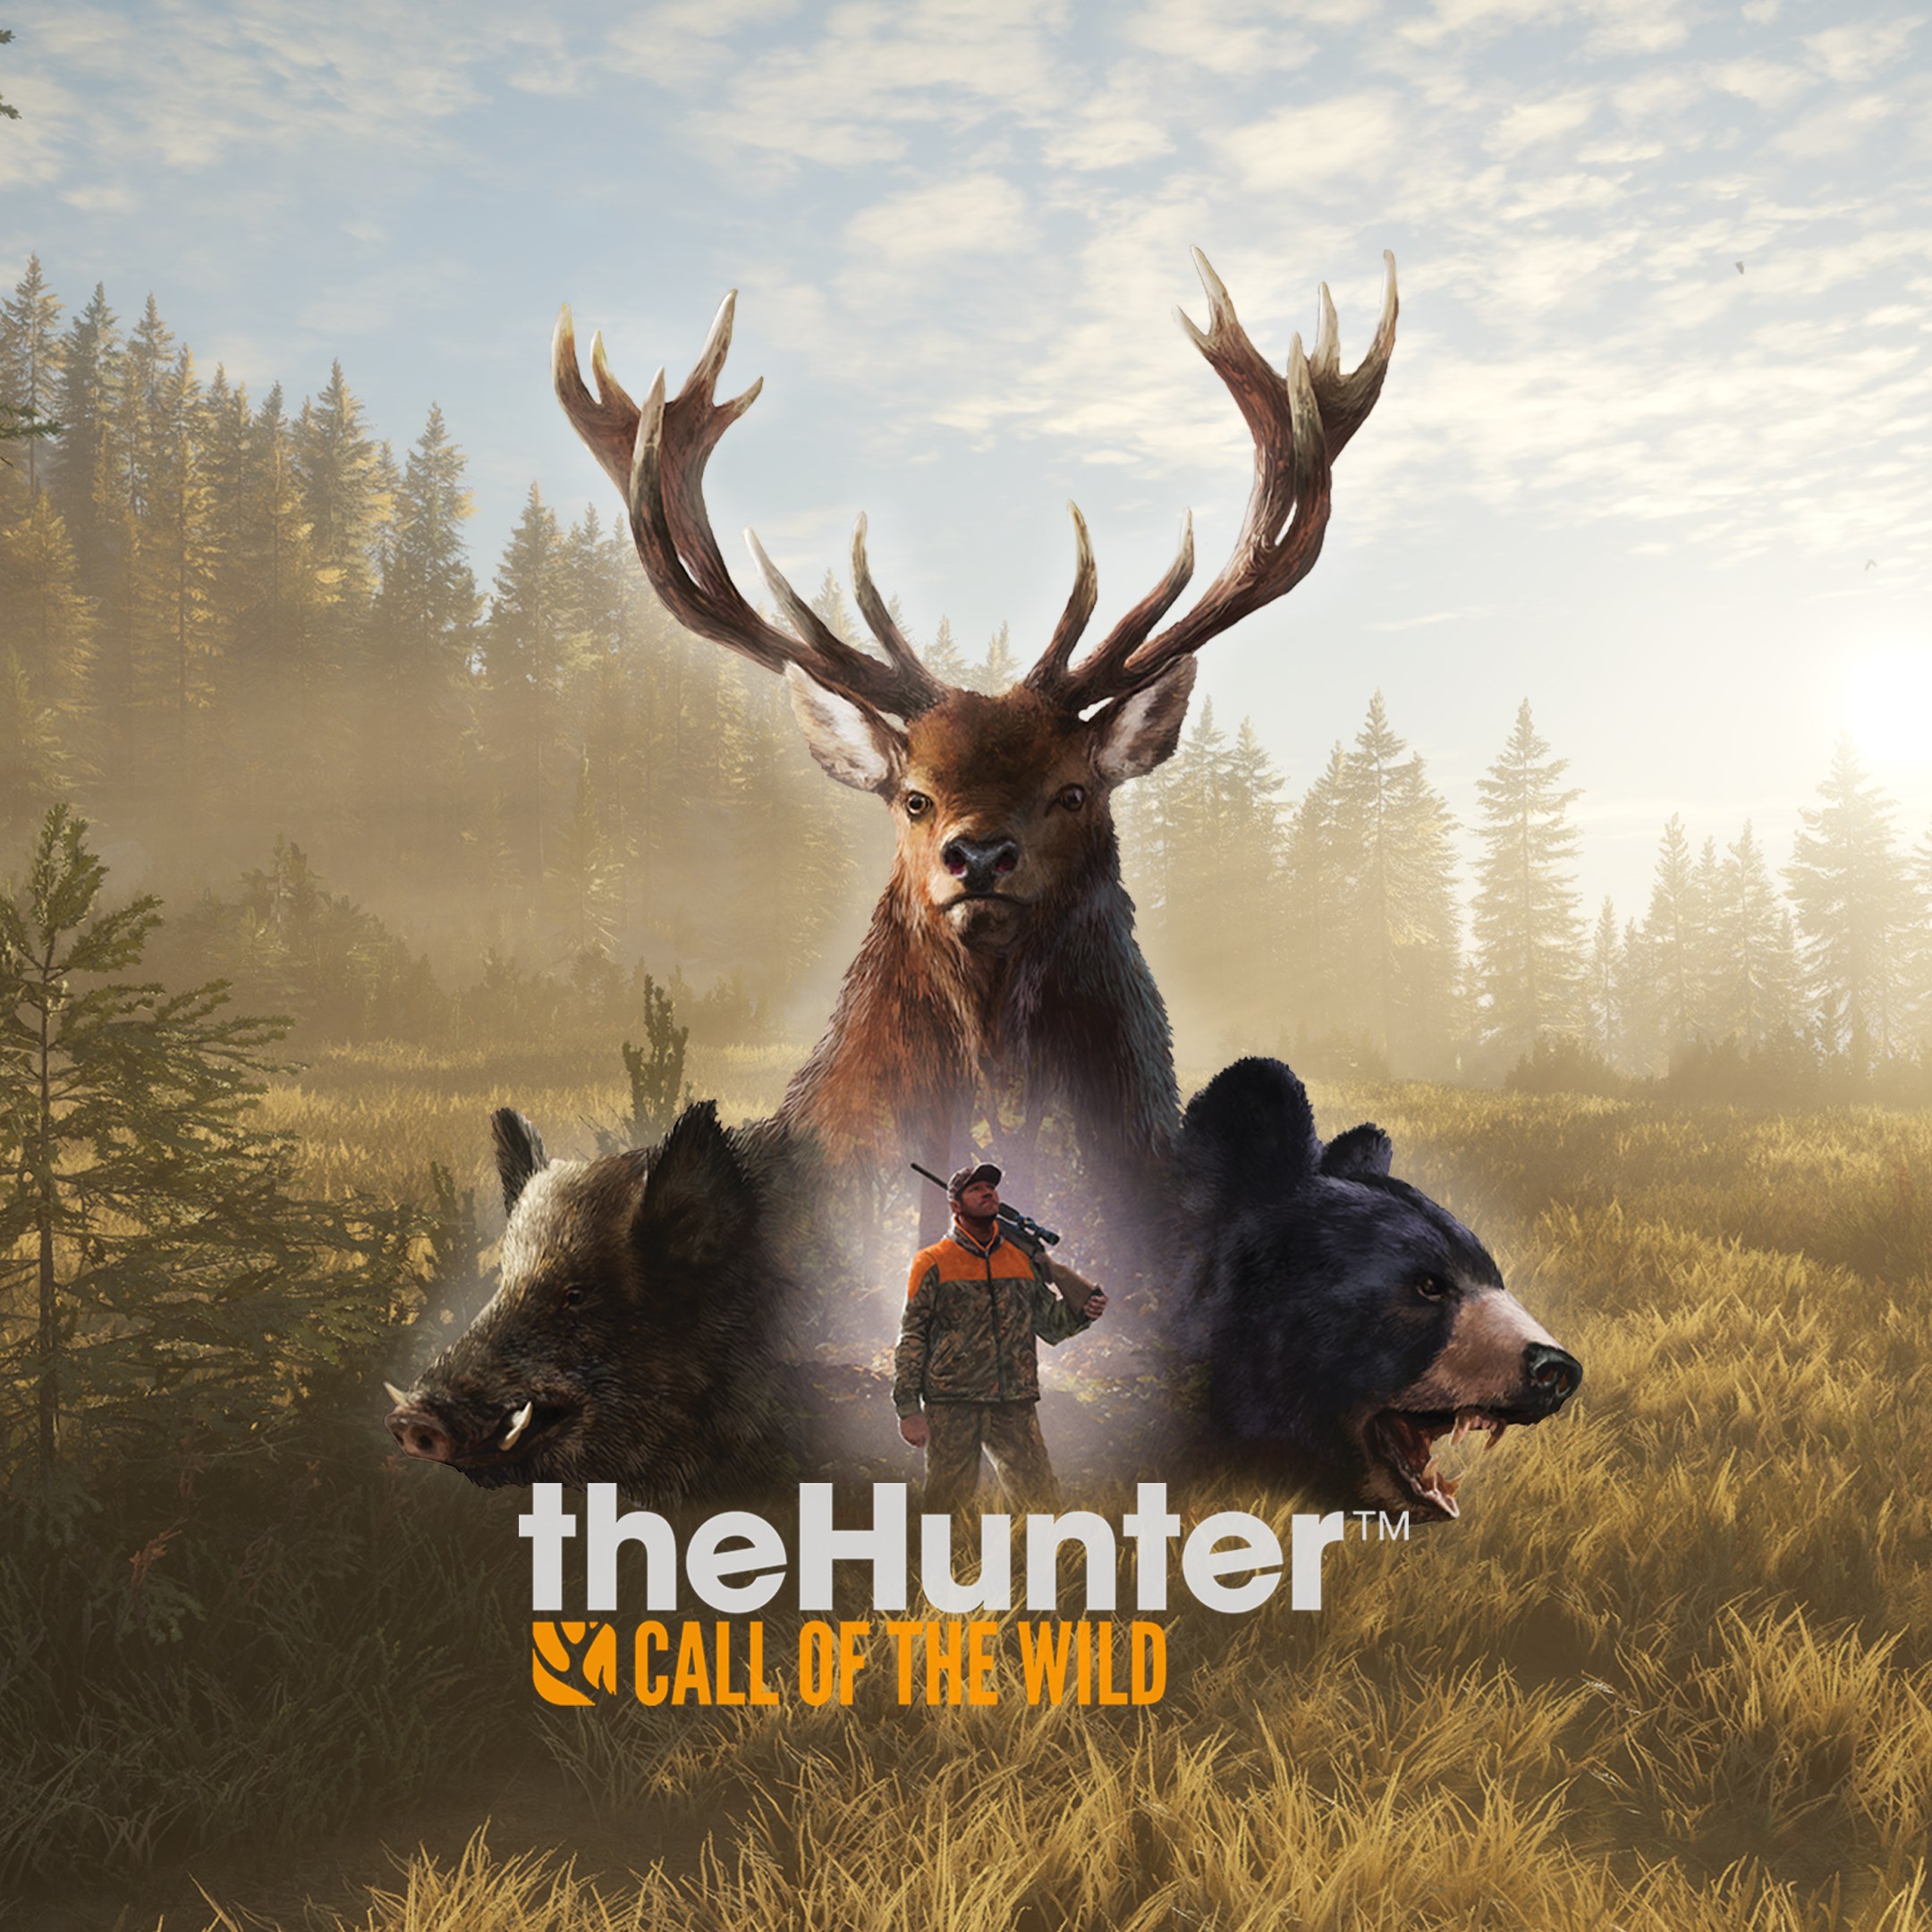 Call of the wild games. Игра the Hunter Call of the Wild. Игра охота the Hunter Call of the Wild. The Hunter Call of the Wild обложка. The Hunter Call of the Wild ПС 4.